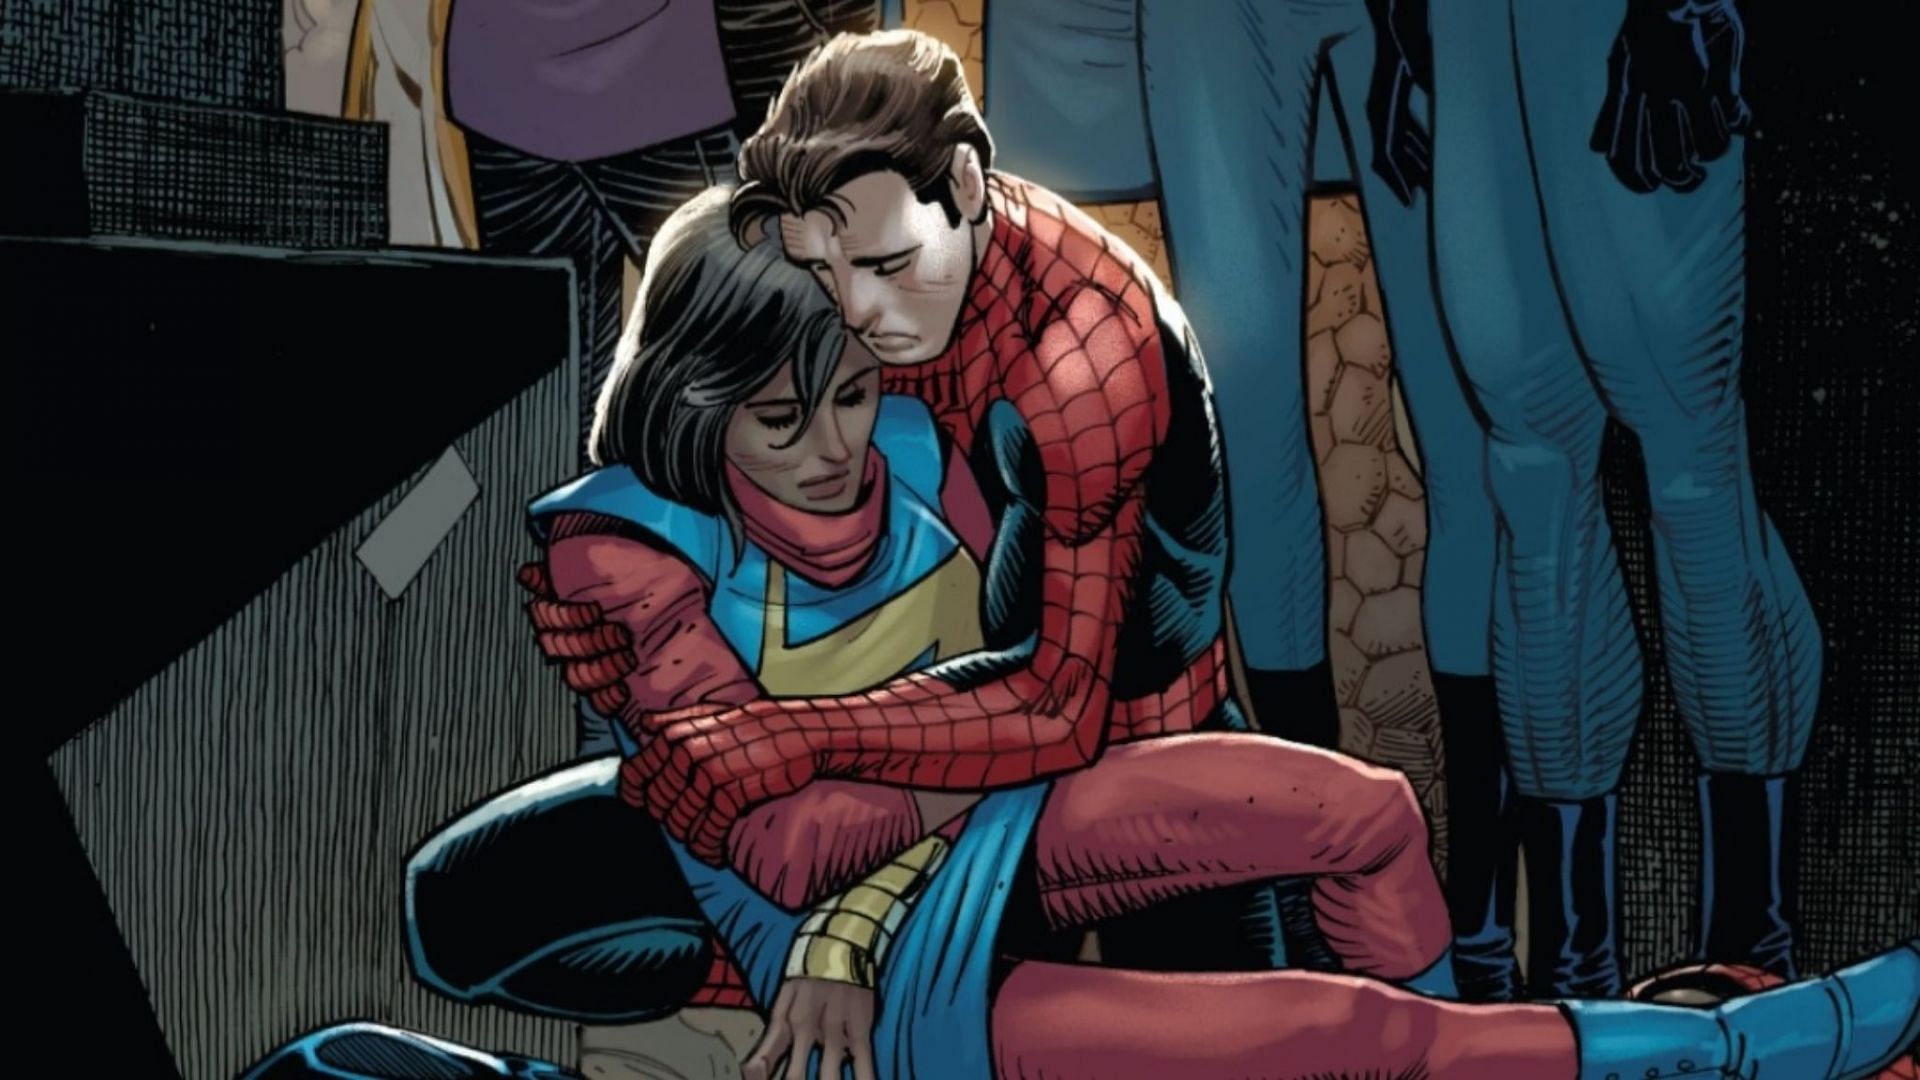 How does Ms. Marvel die in Amazing Spider-Man #26? Exploring details and the fan reaction to her death